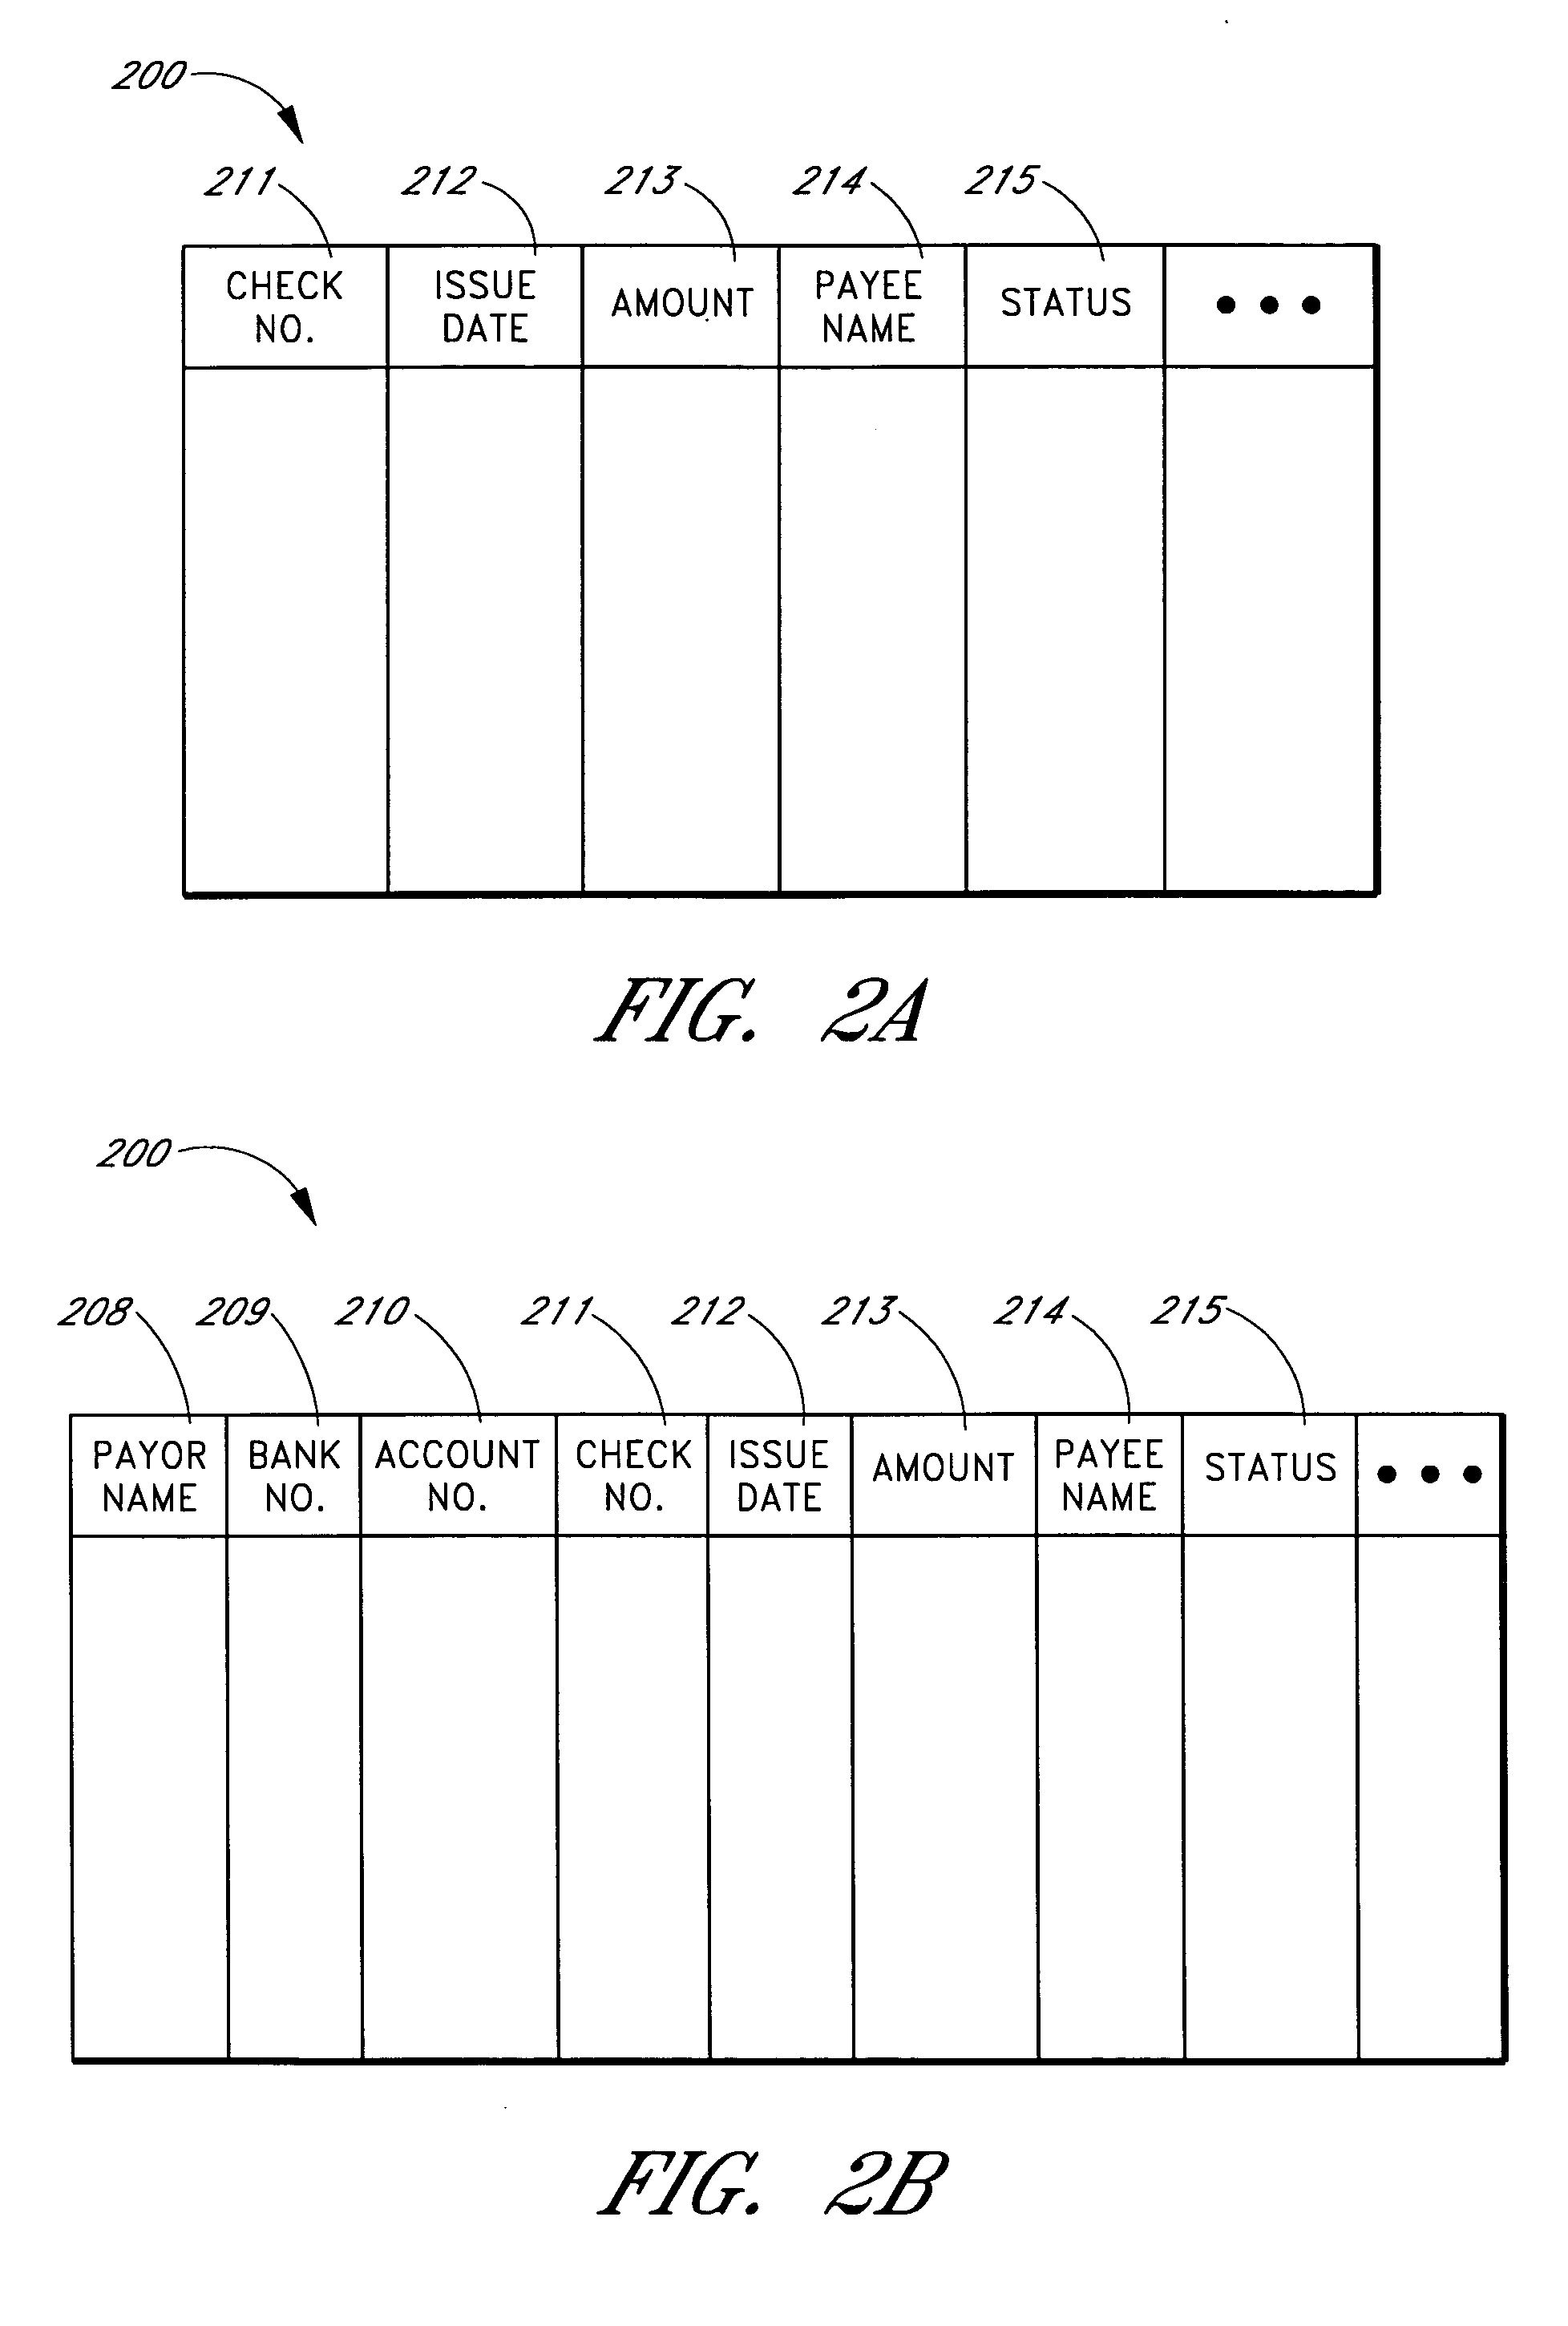 Systems and methods for routing requests for reconcilement information